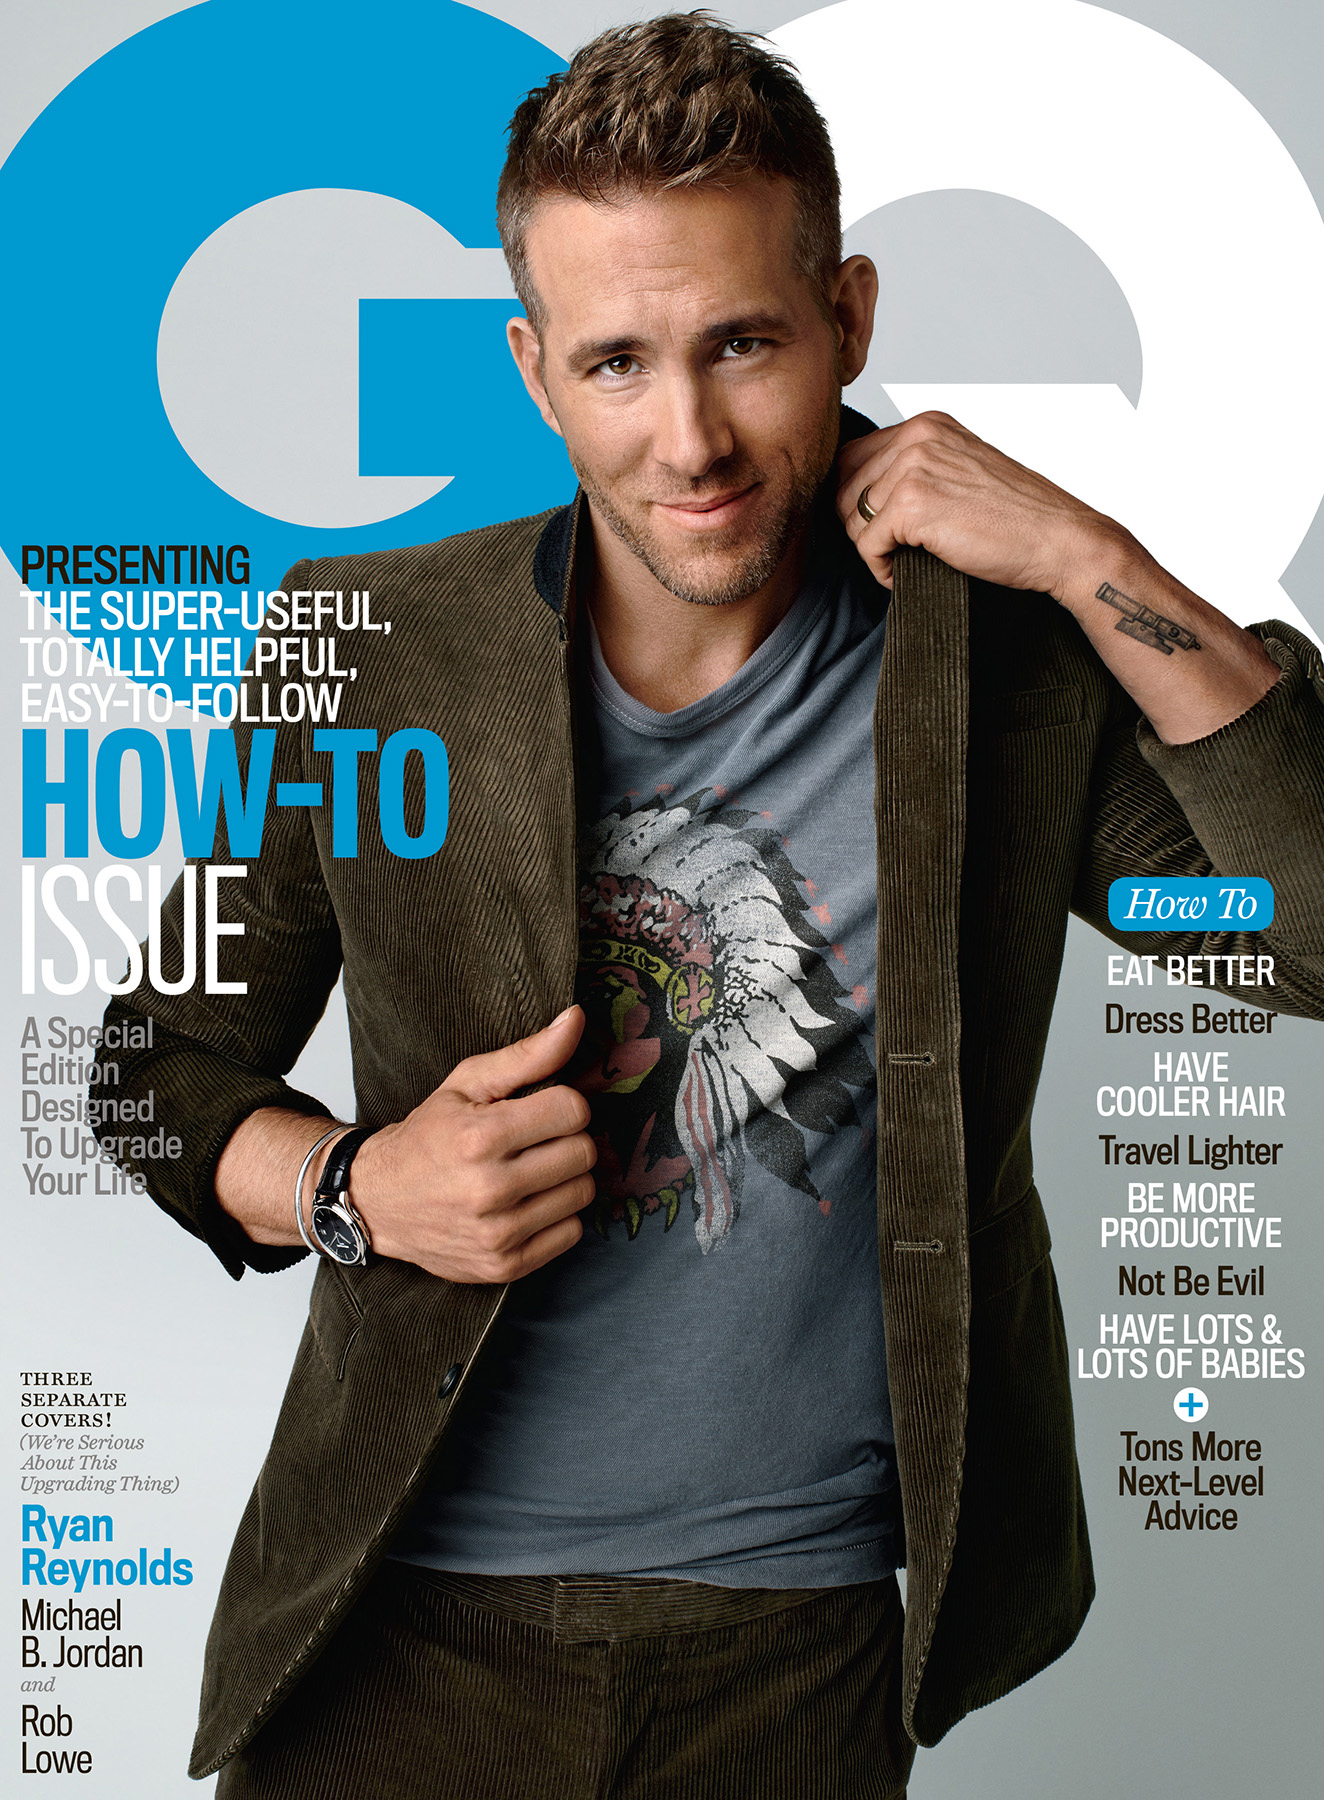 PHOTO: Ryan Reynolds appears on the cover of the October 2015 issue of GQ magazine.